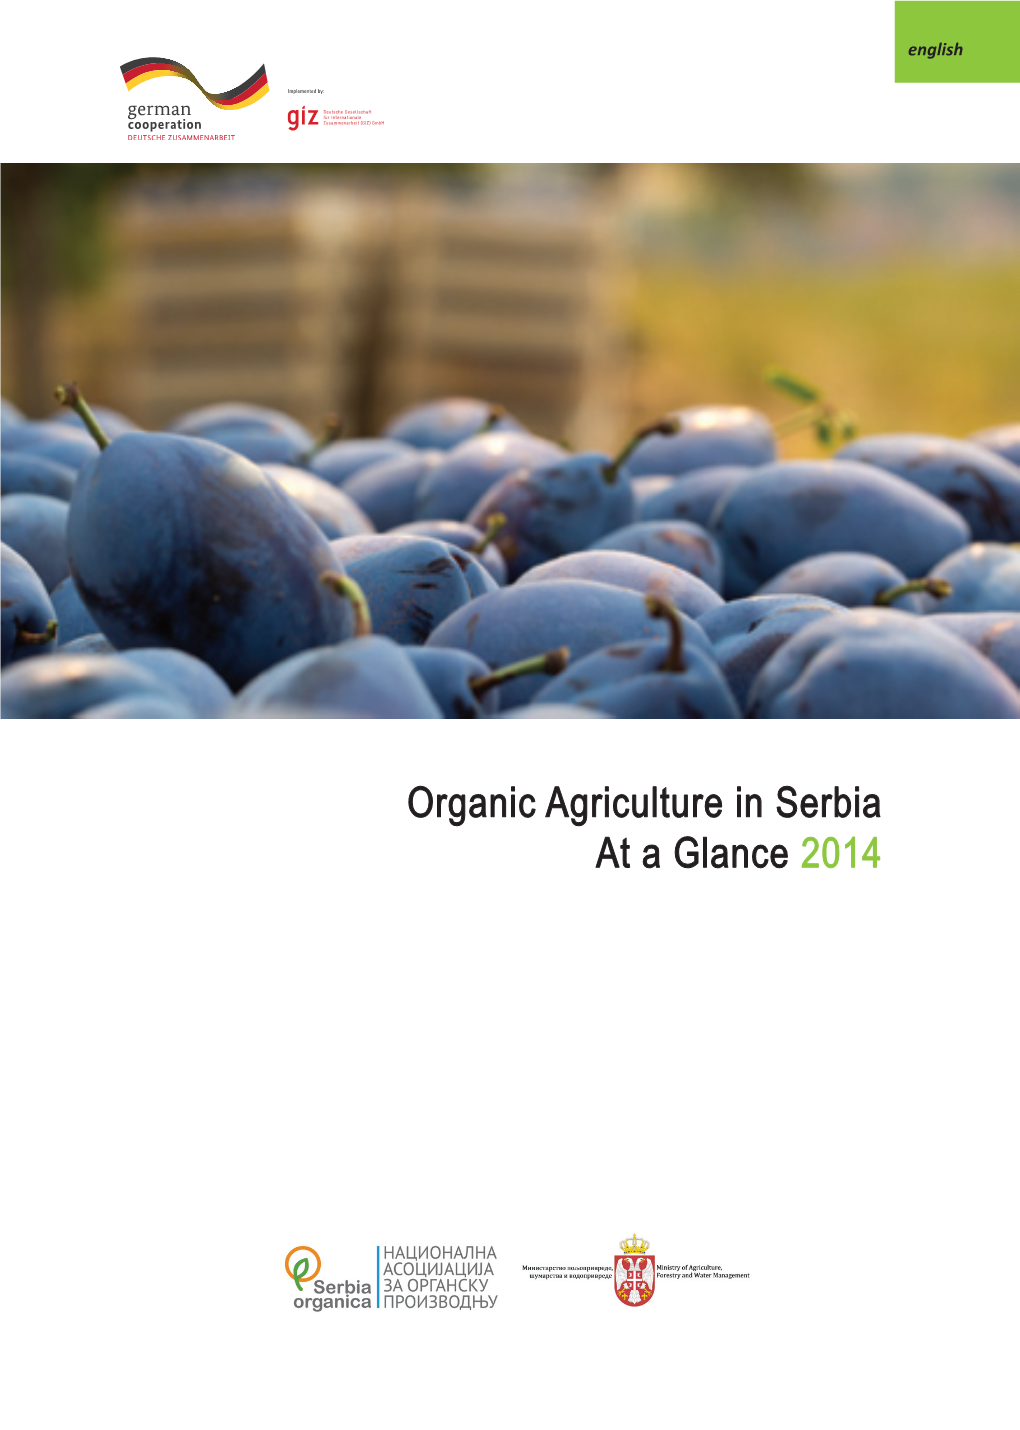 Organic Agriculture in Serbia at a Glance 2014